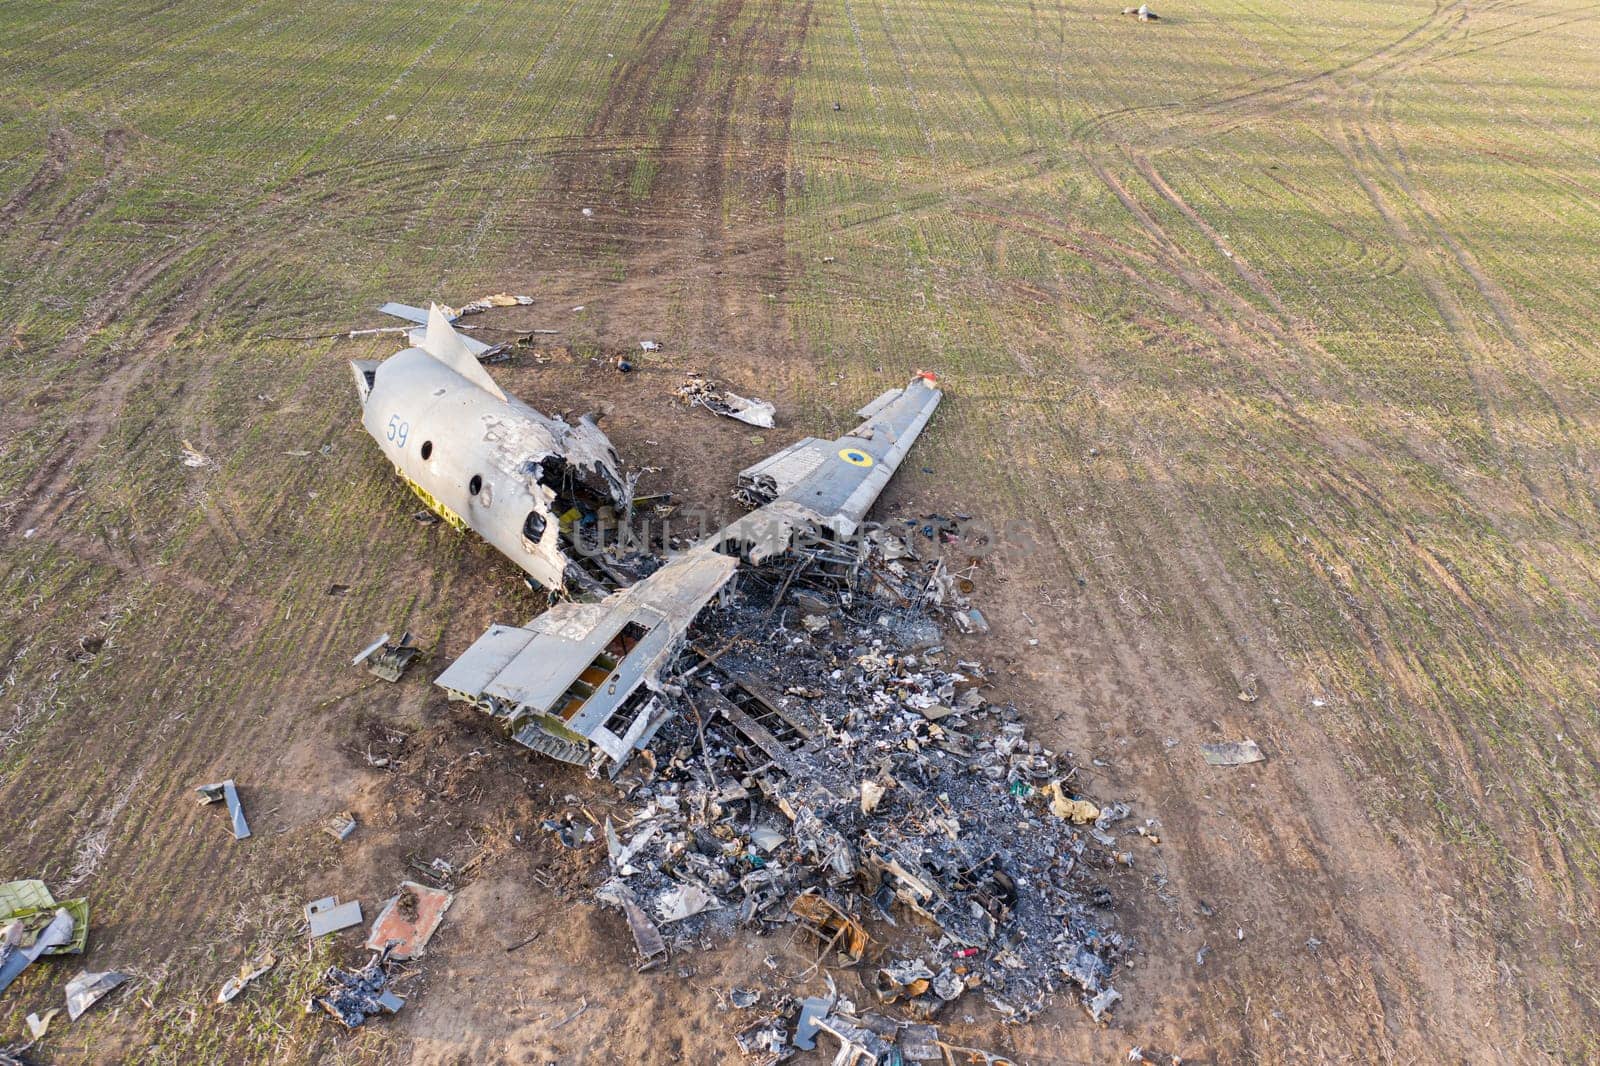 Aircraft an-26 accident on the field in Ukraine by Hris